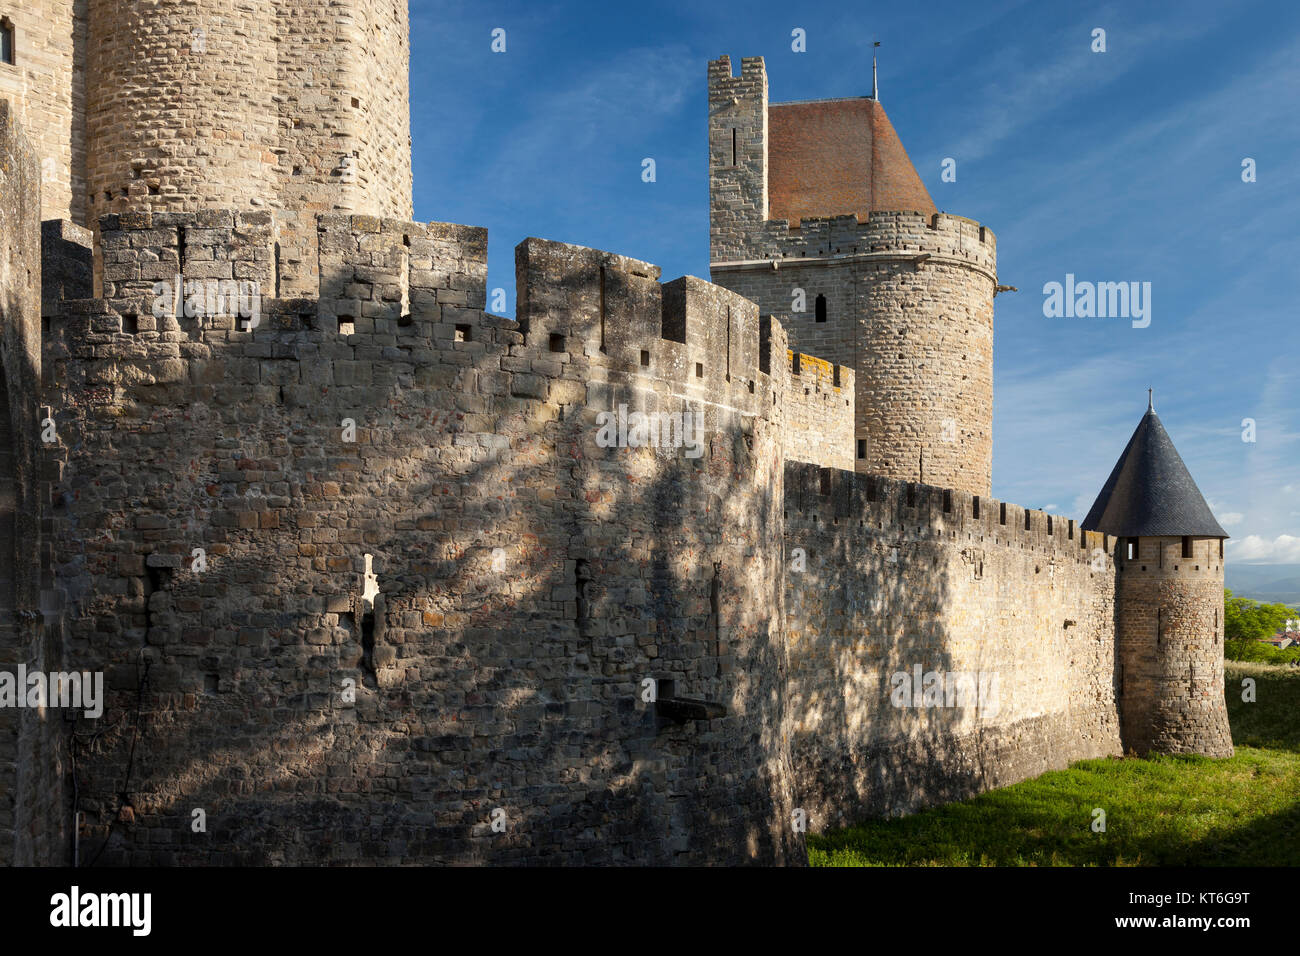 Walled and fortified medieval town of Carcassonne, Occitanie, France Stock Photo